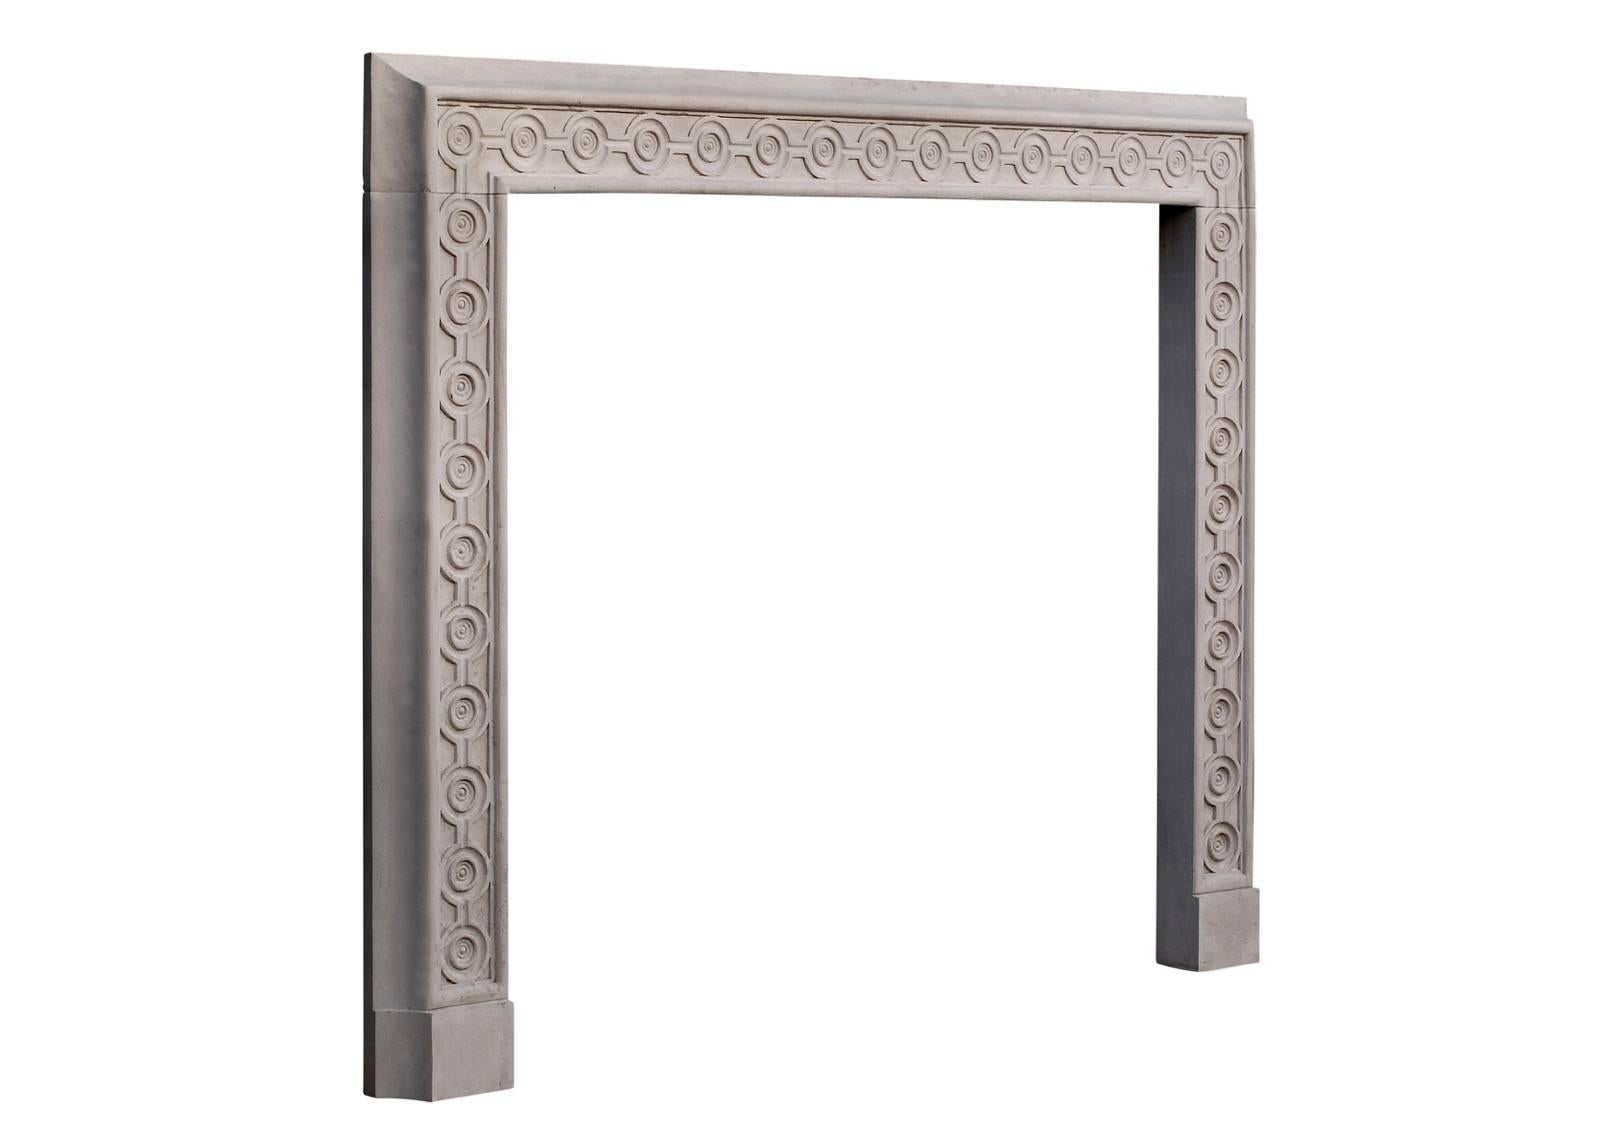 An attractive English limestone fireplace. The frieze and jambs with guilloche carving and scotia moulding to outside. A Fine architectural piece. Modern.

Measures: 
Shelf width:          1435 mm /    56 1/2 in
Overall height:     1175 mm /     46